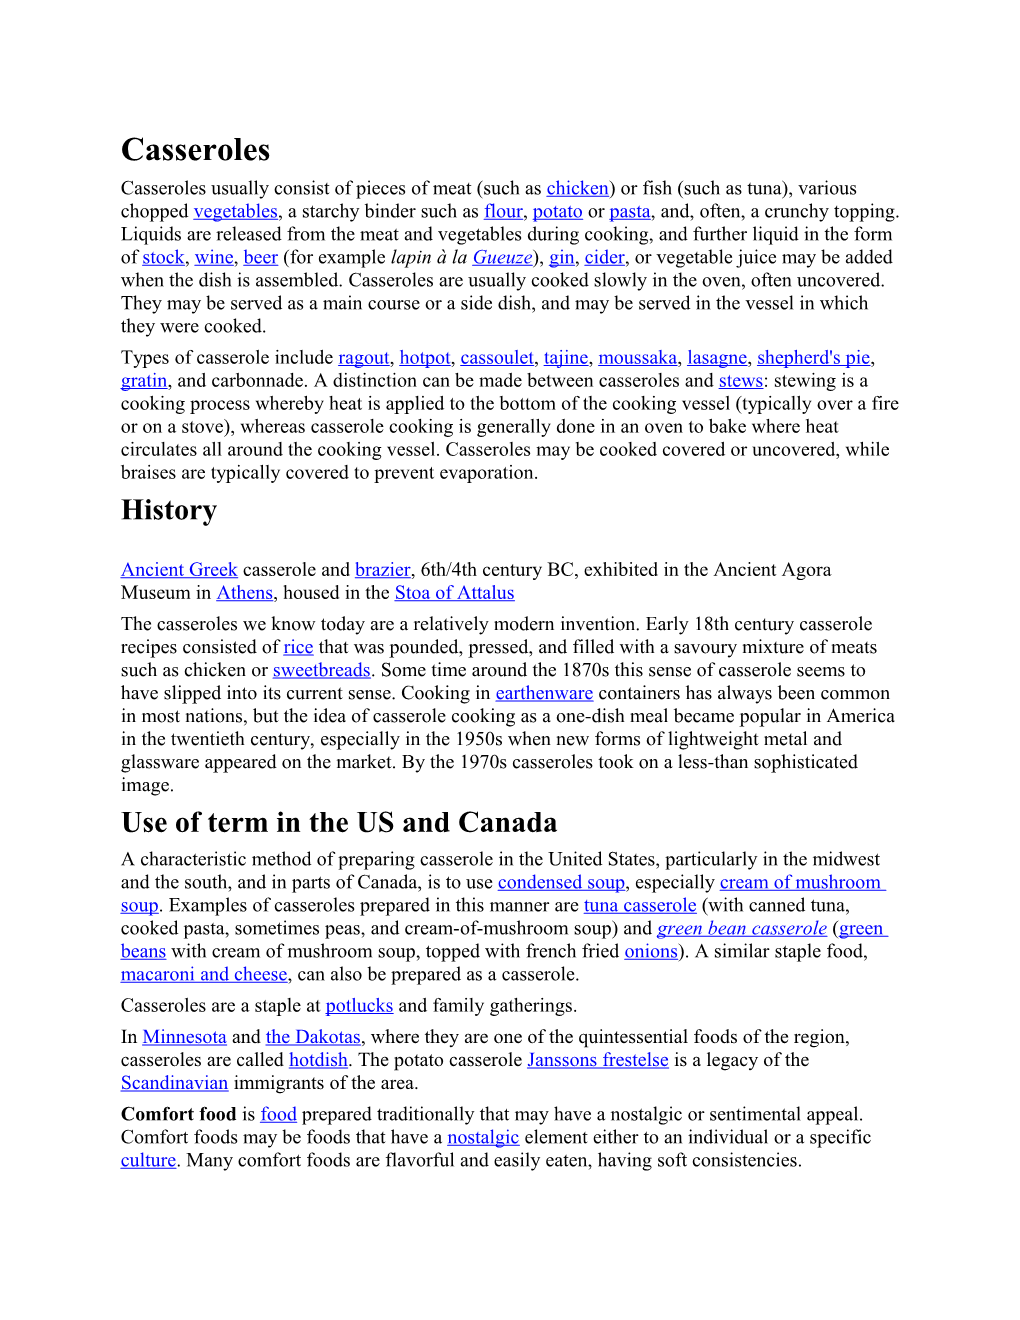 Use of Term in the US and Canada